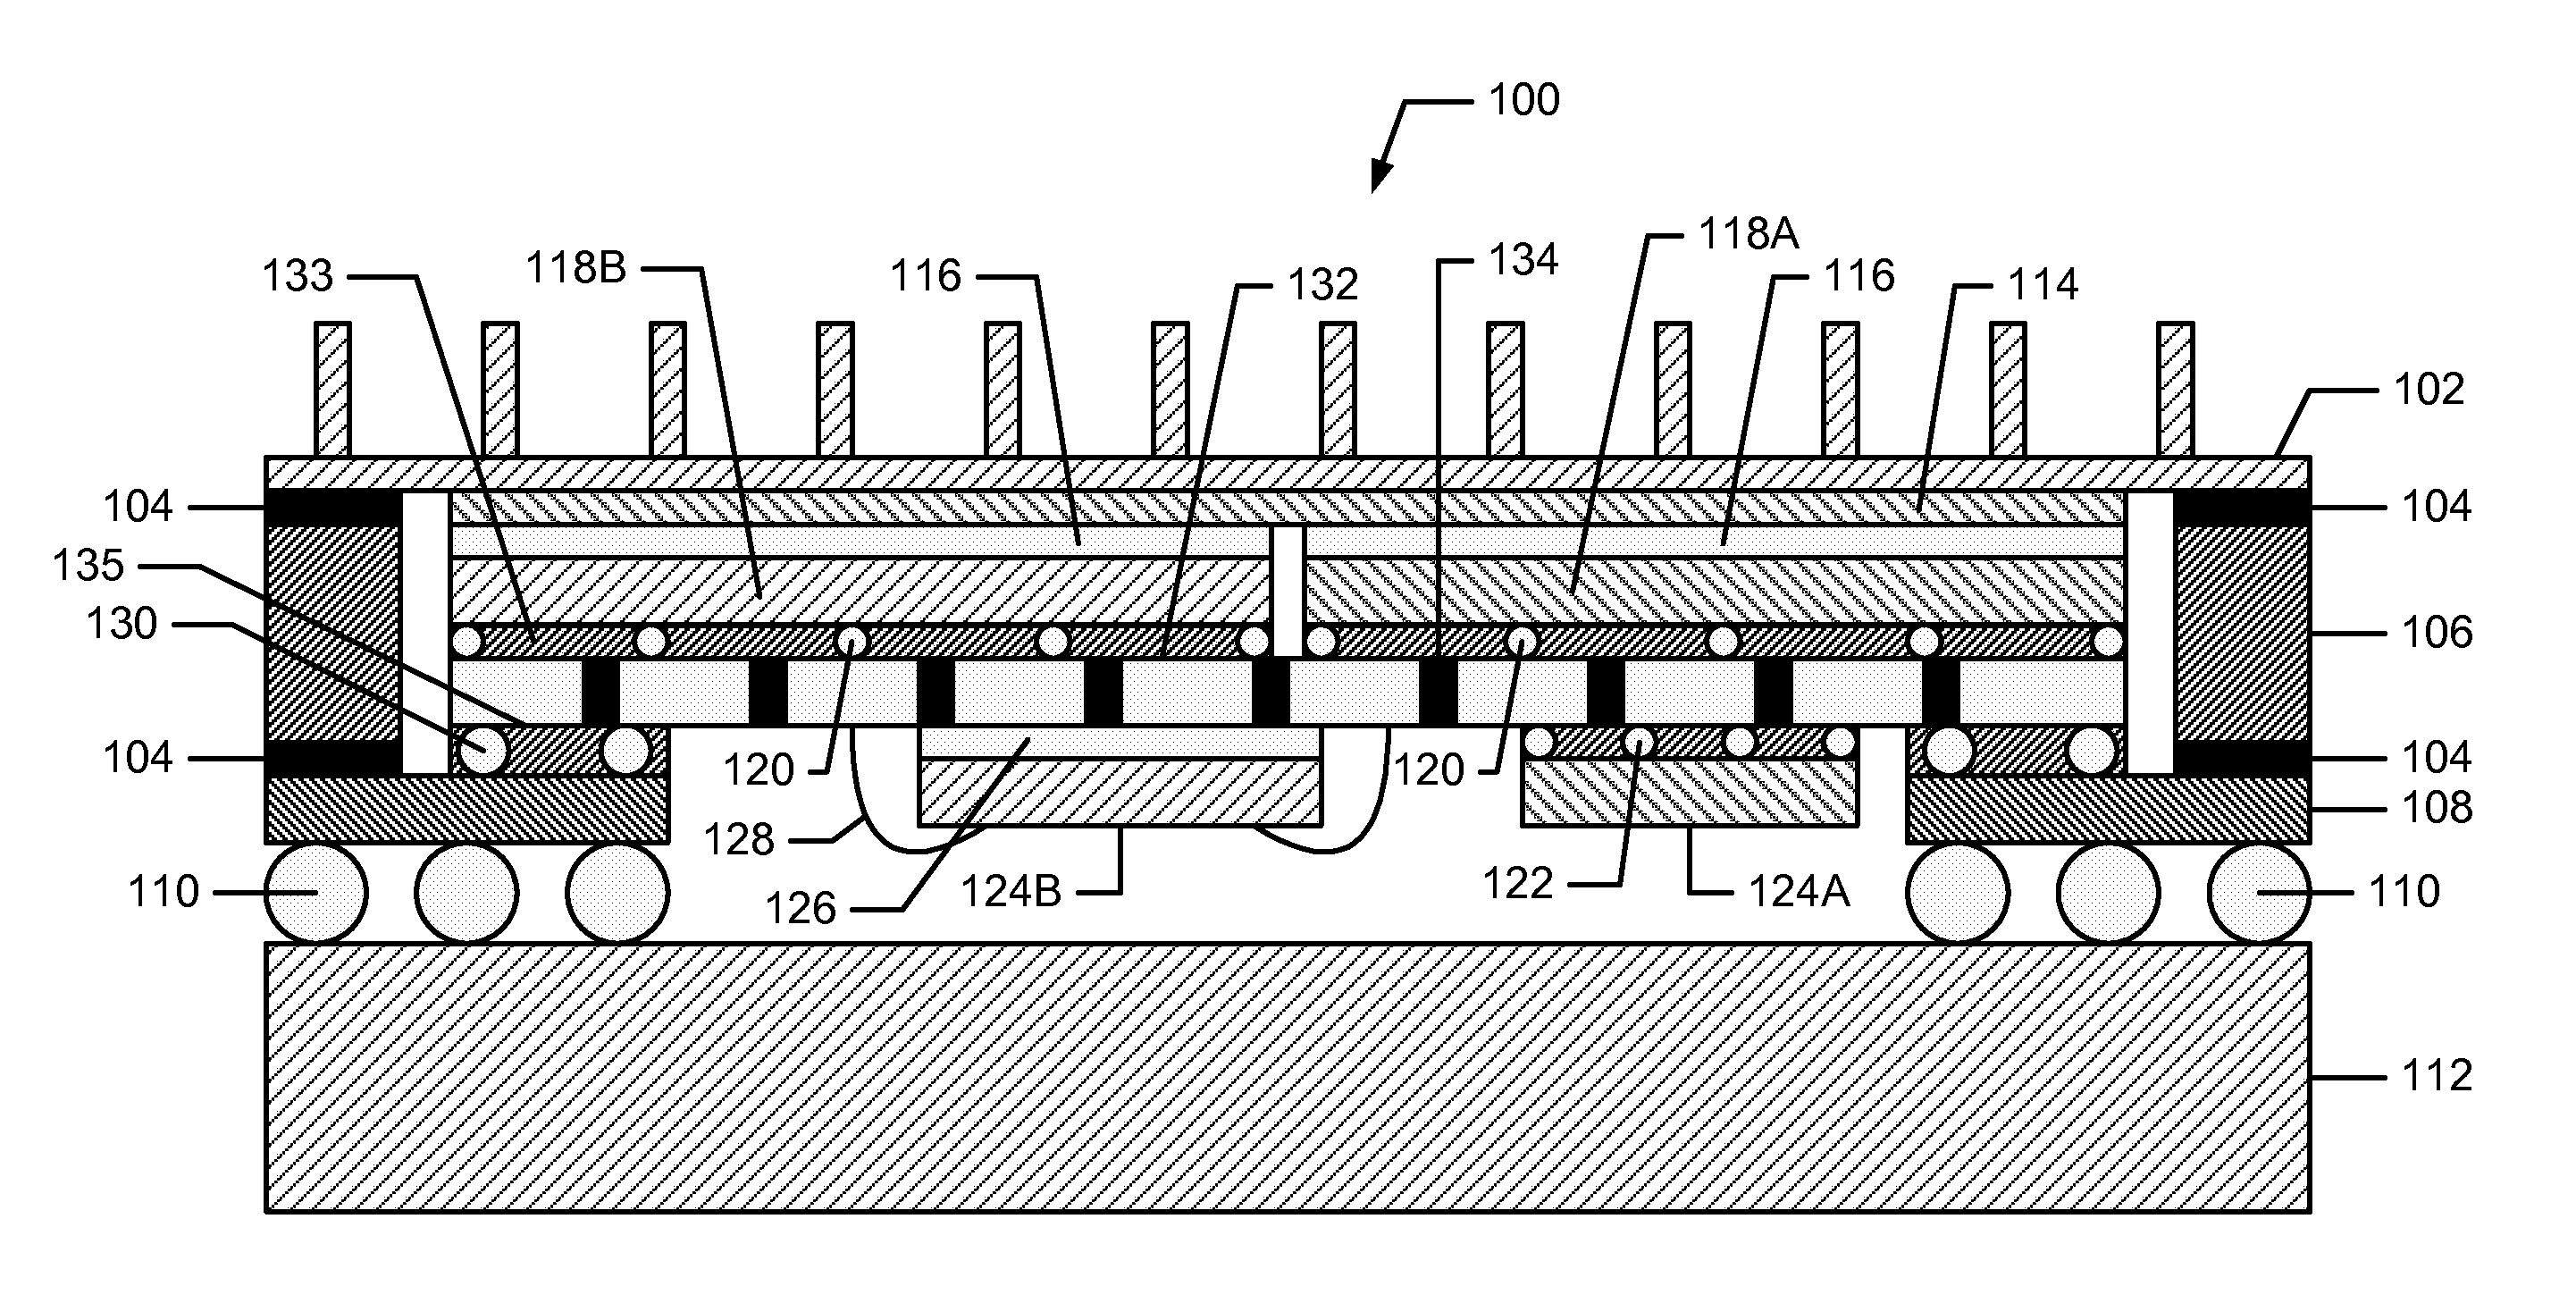 Apparatus having thermal-enhanced and cost-effective 3D IC integration structure with through silicon via interposers